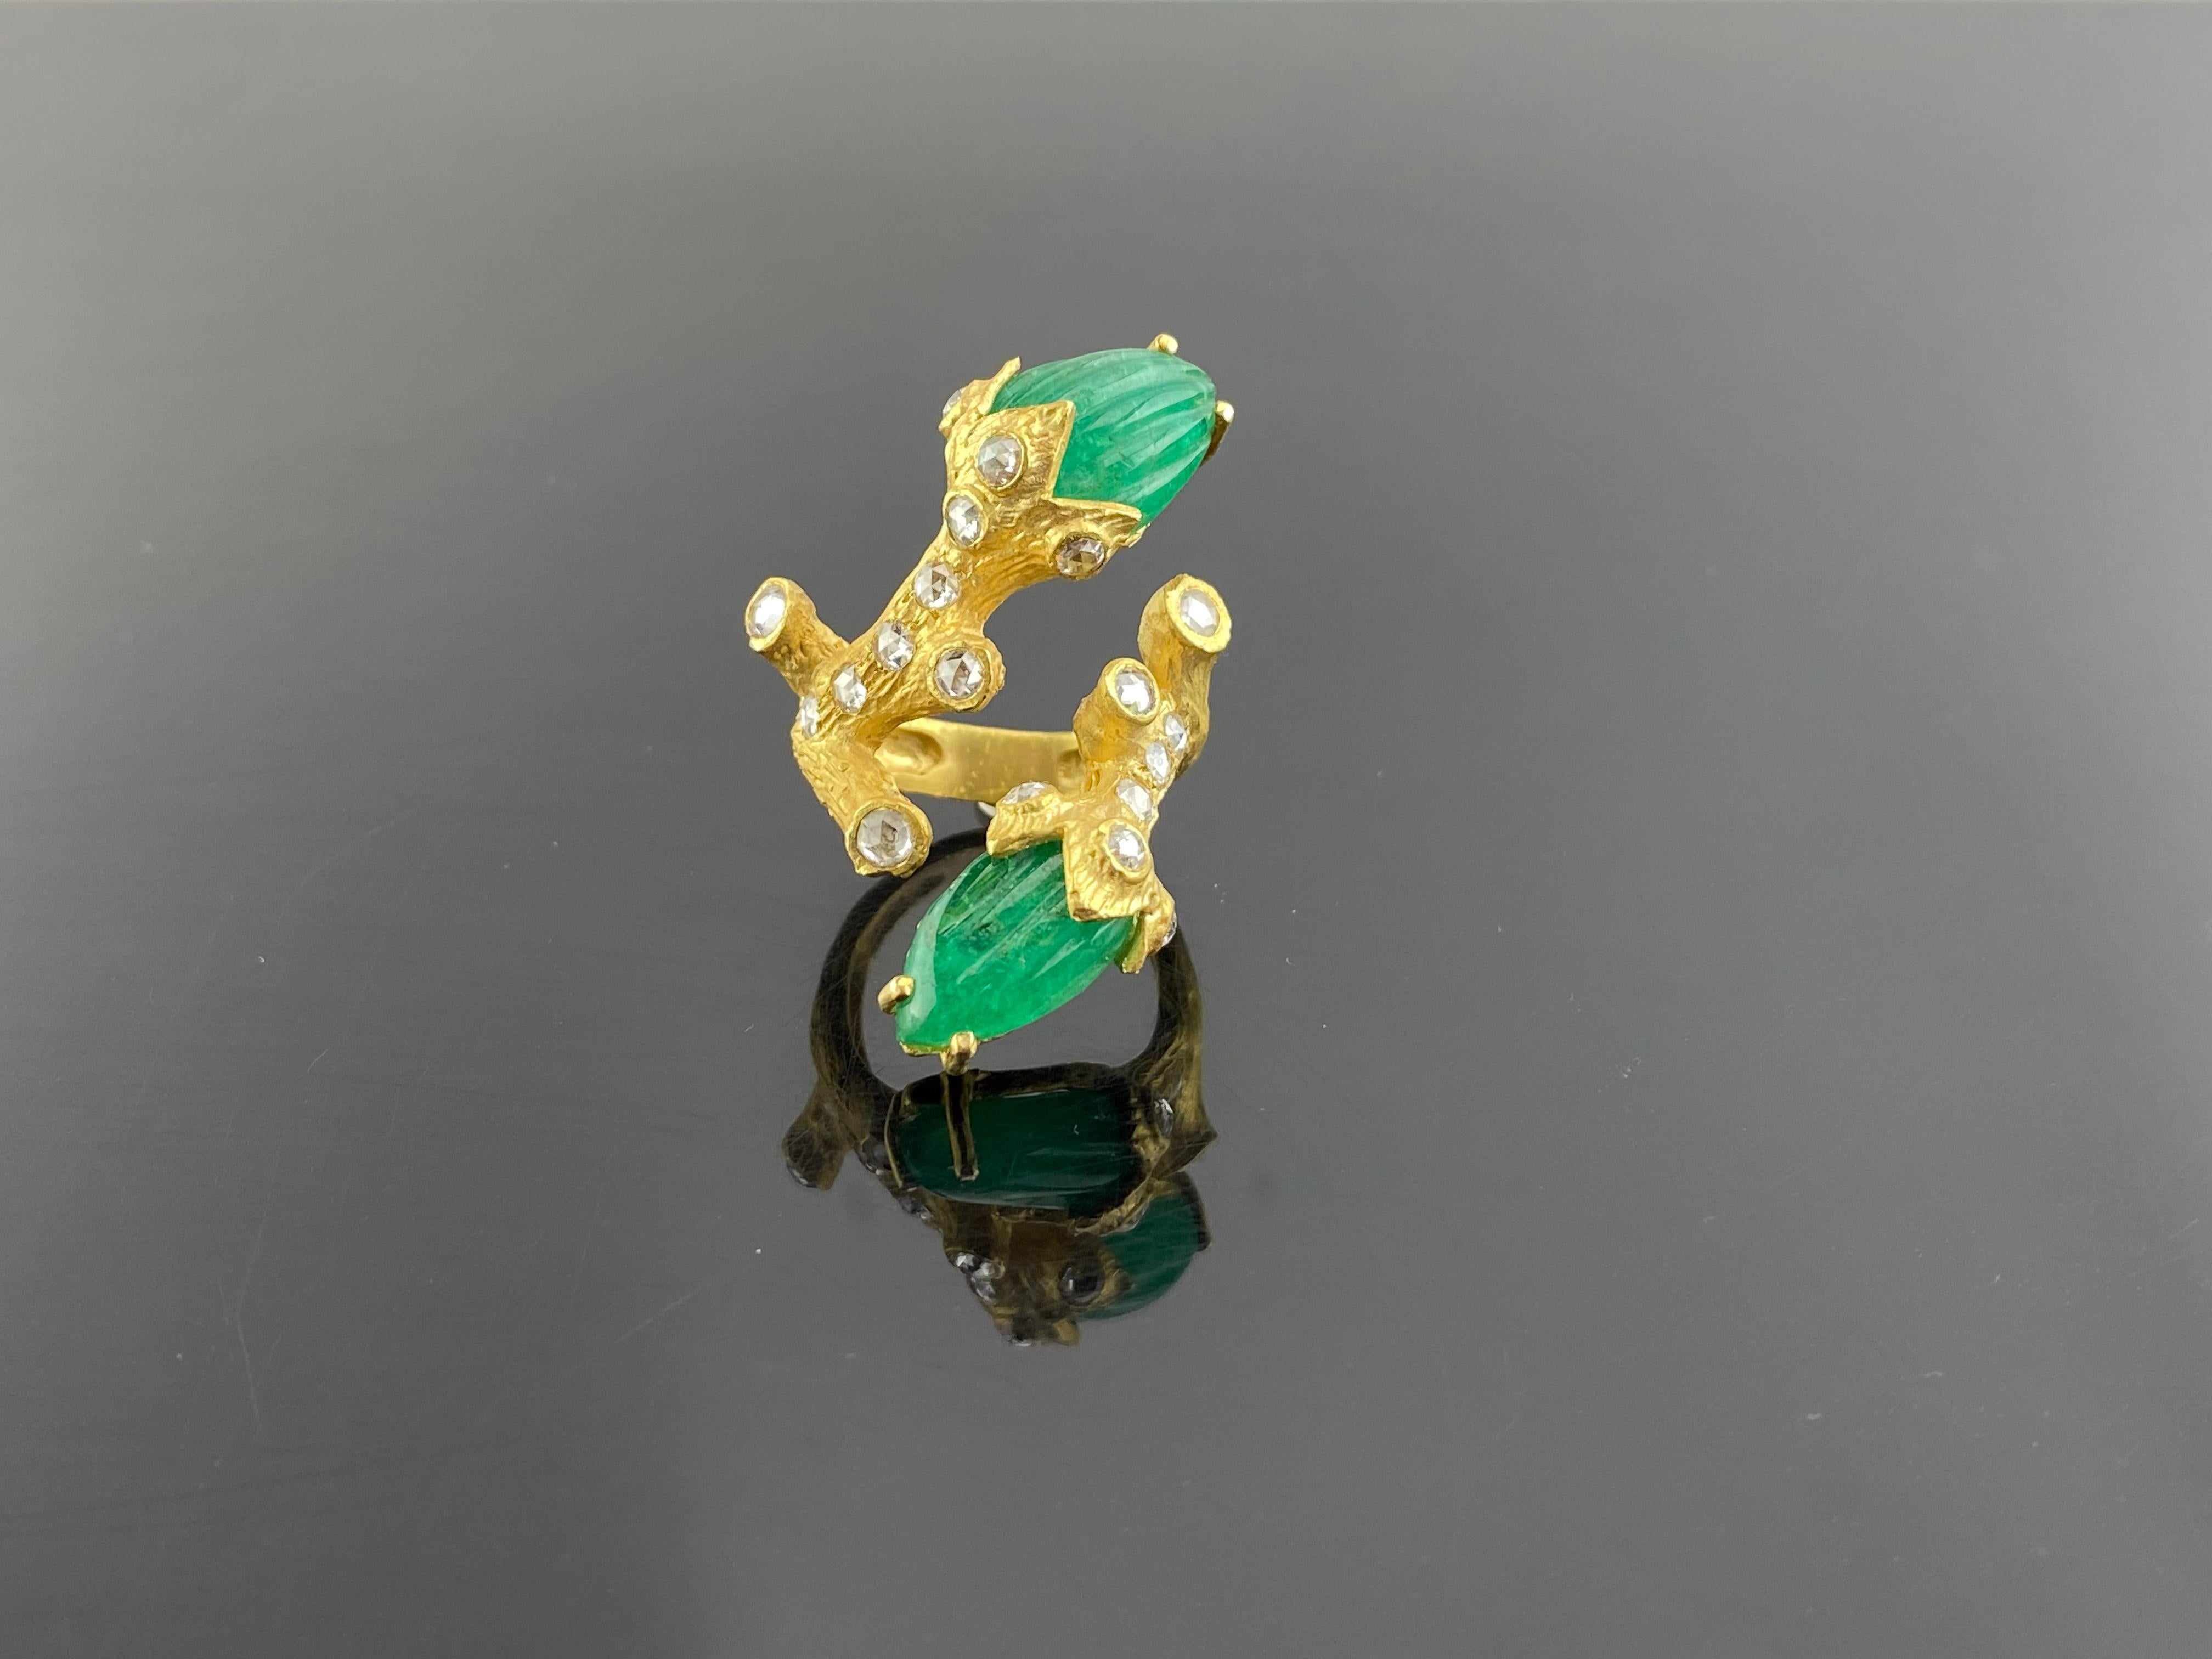 An art-deco inspired hand-carved Colombian Emerald cocktail ring set in solid matte finish 18K Yellow Gold and White Diamonds. The weight of the 2 Emerald Carvings is 11.19 carats. The Emerald is completely natural with no external treatments done